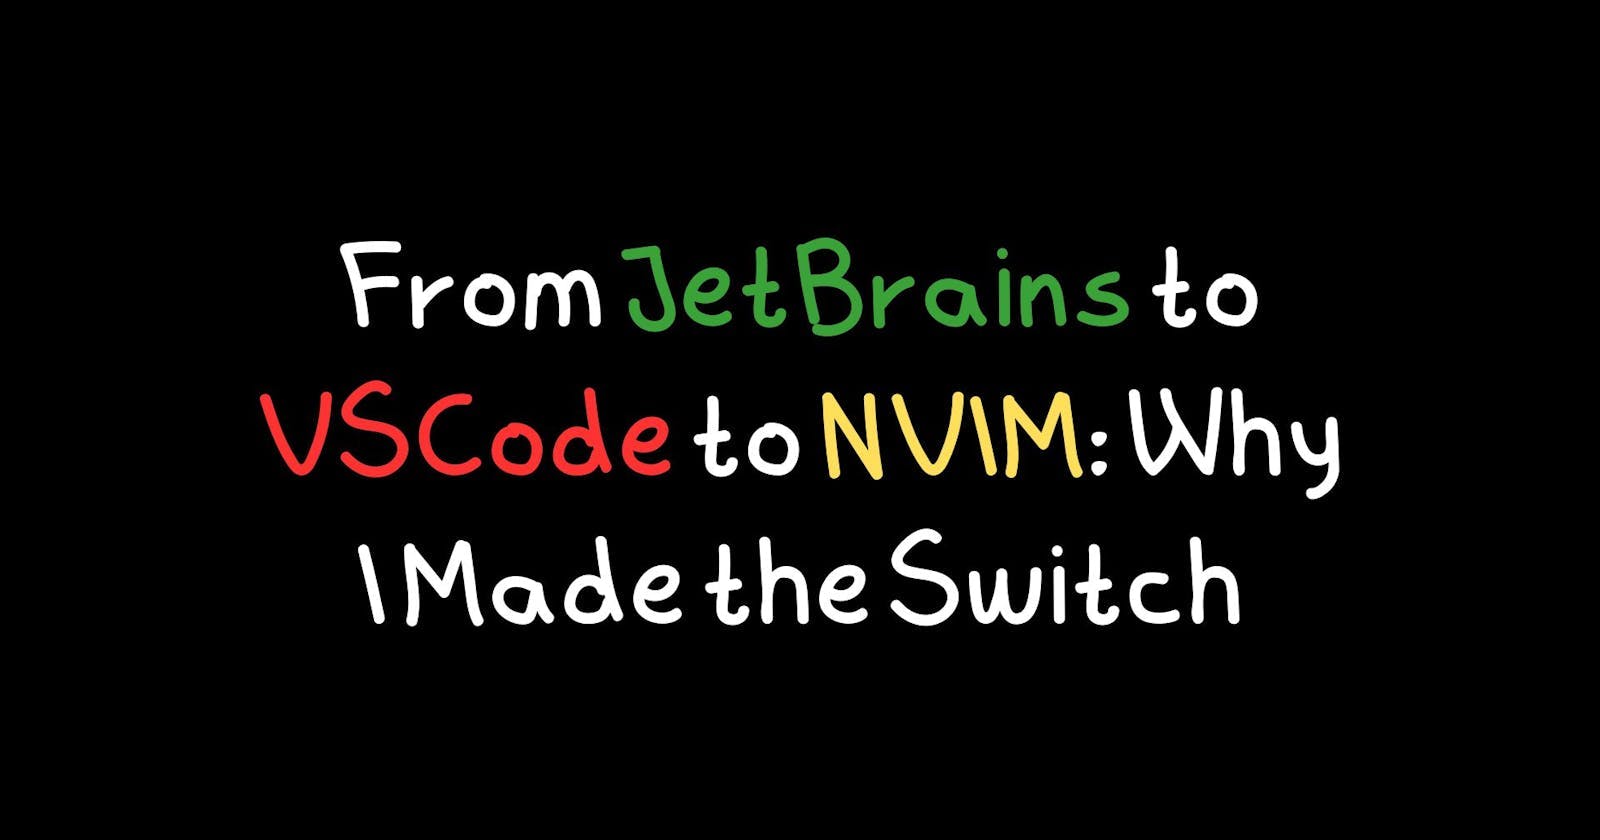 From JetBrains to VSCode to NVIM: Why I Made the Switch